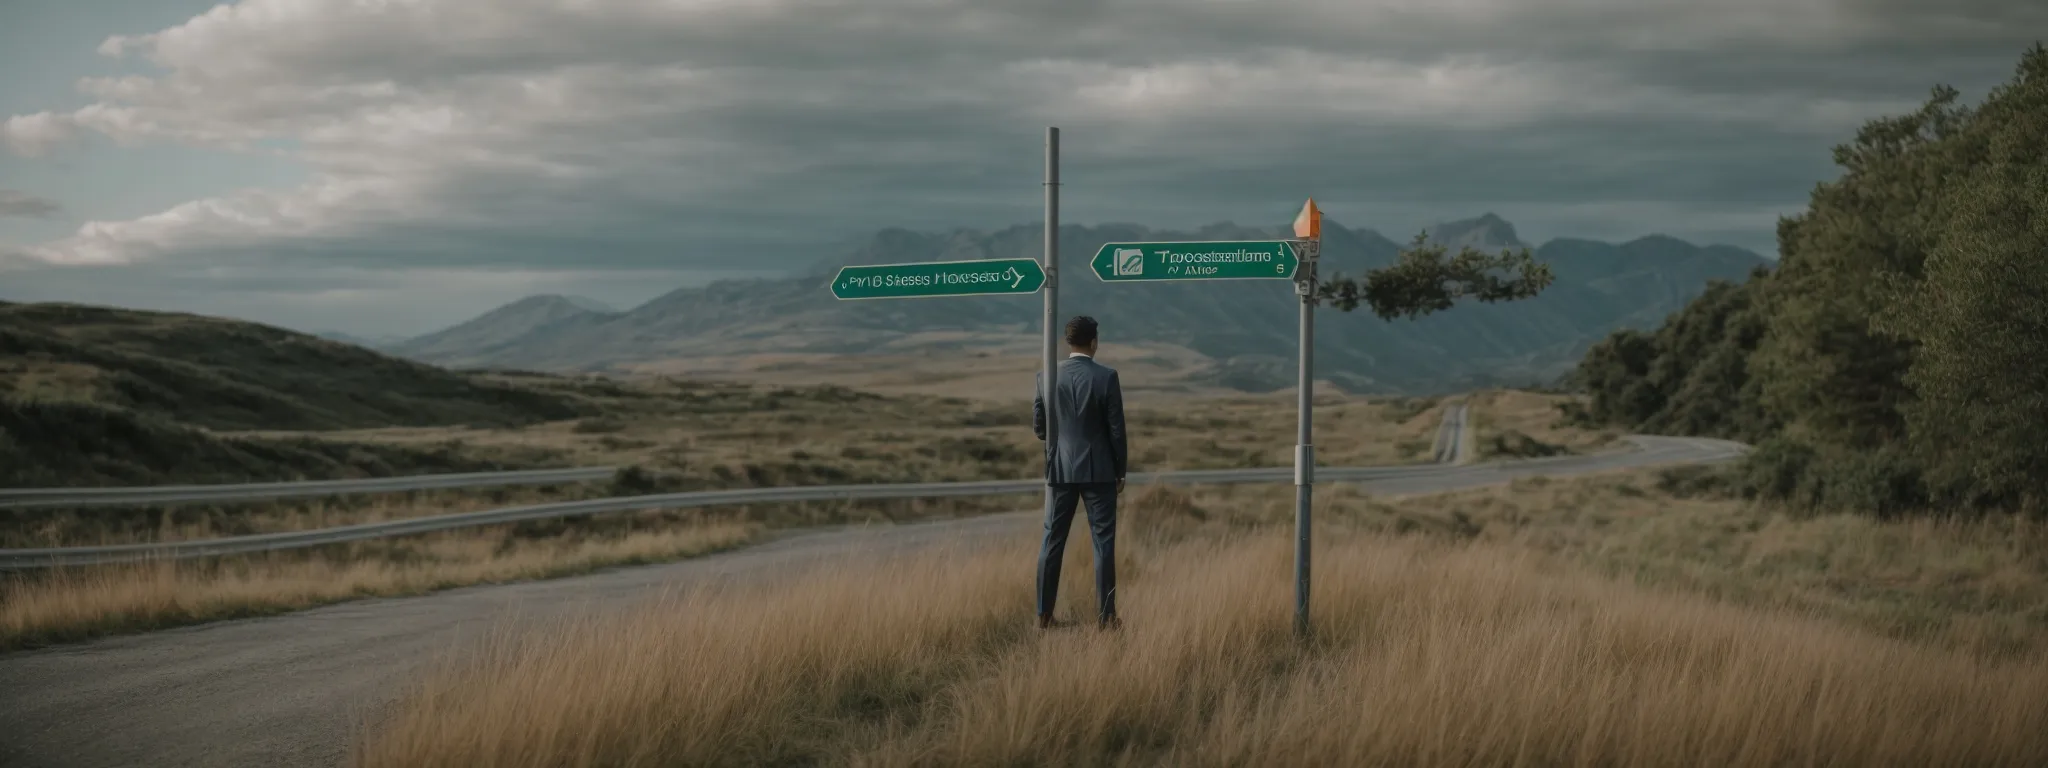 a ceo experiencing a moment of contemplation at a crossroads signpost with paths marked 